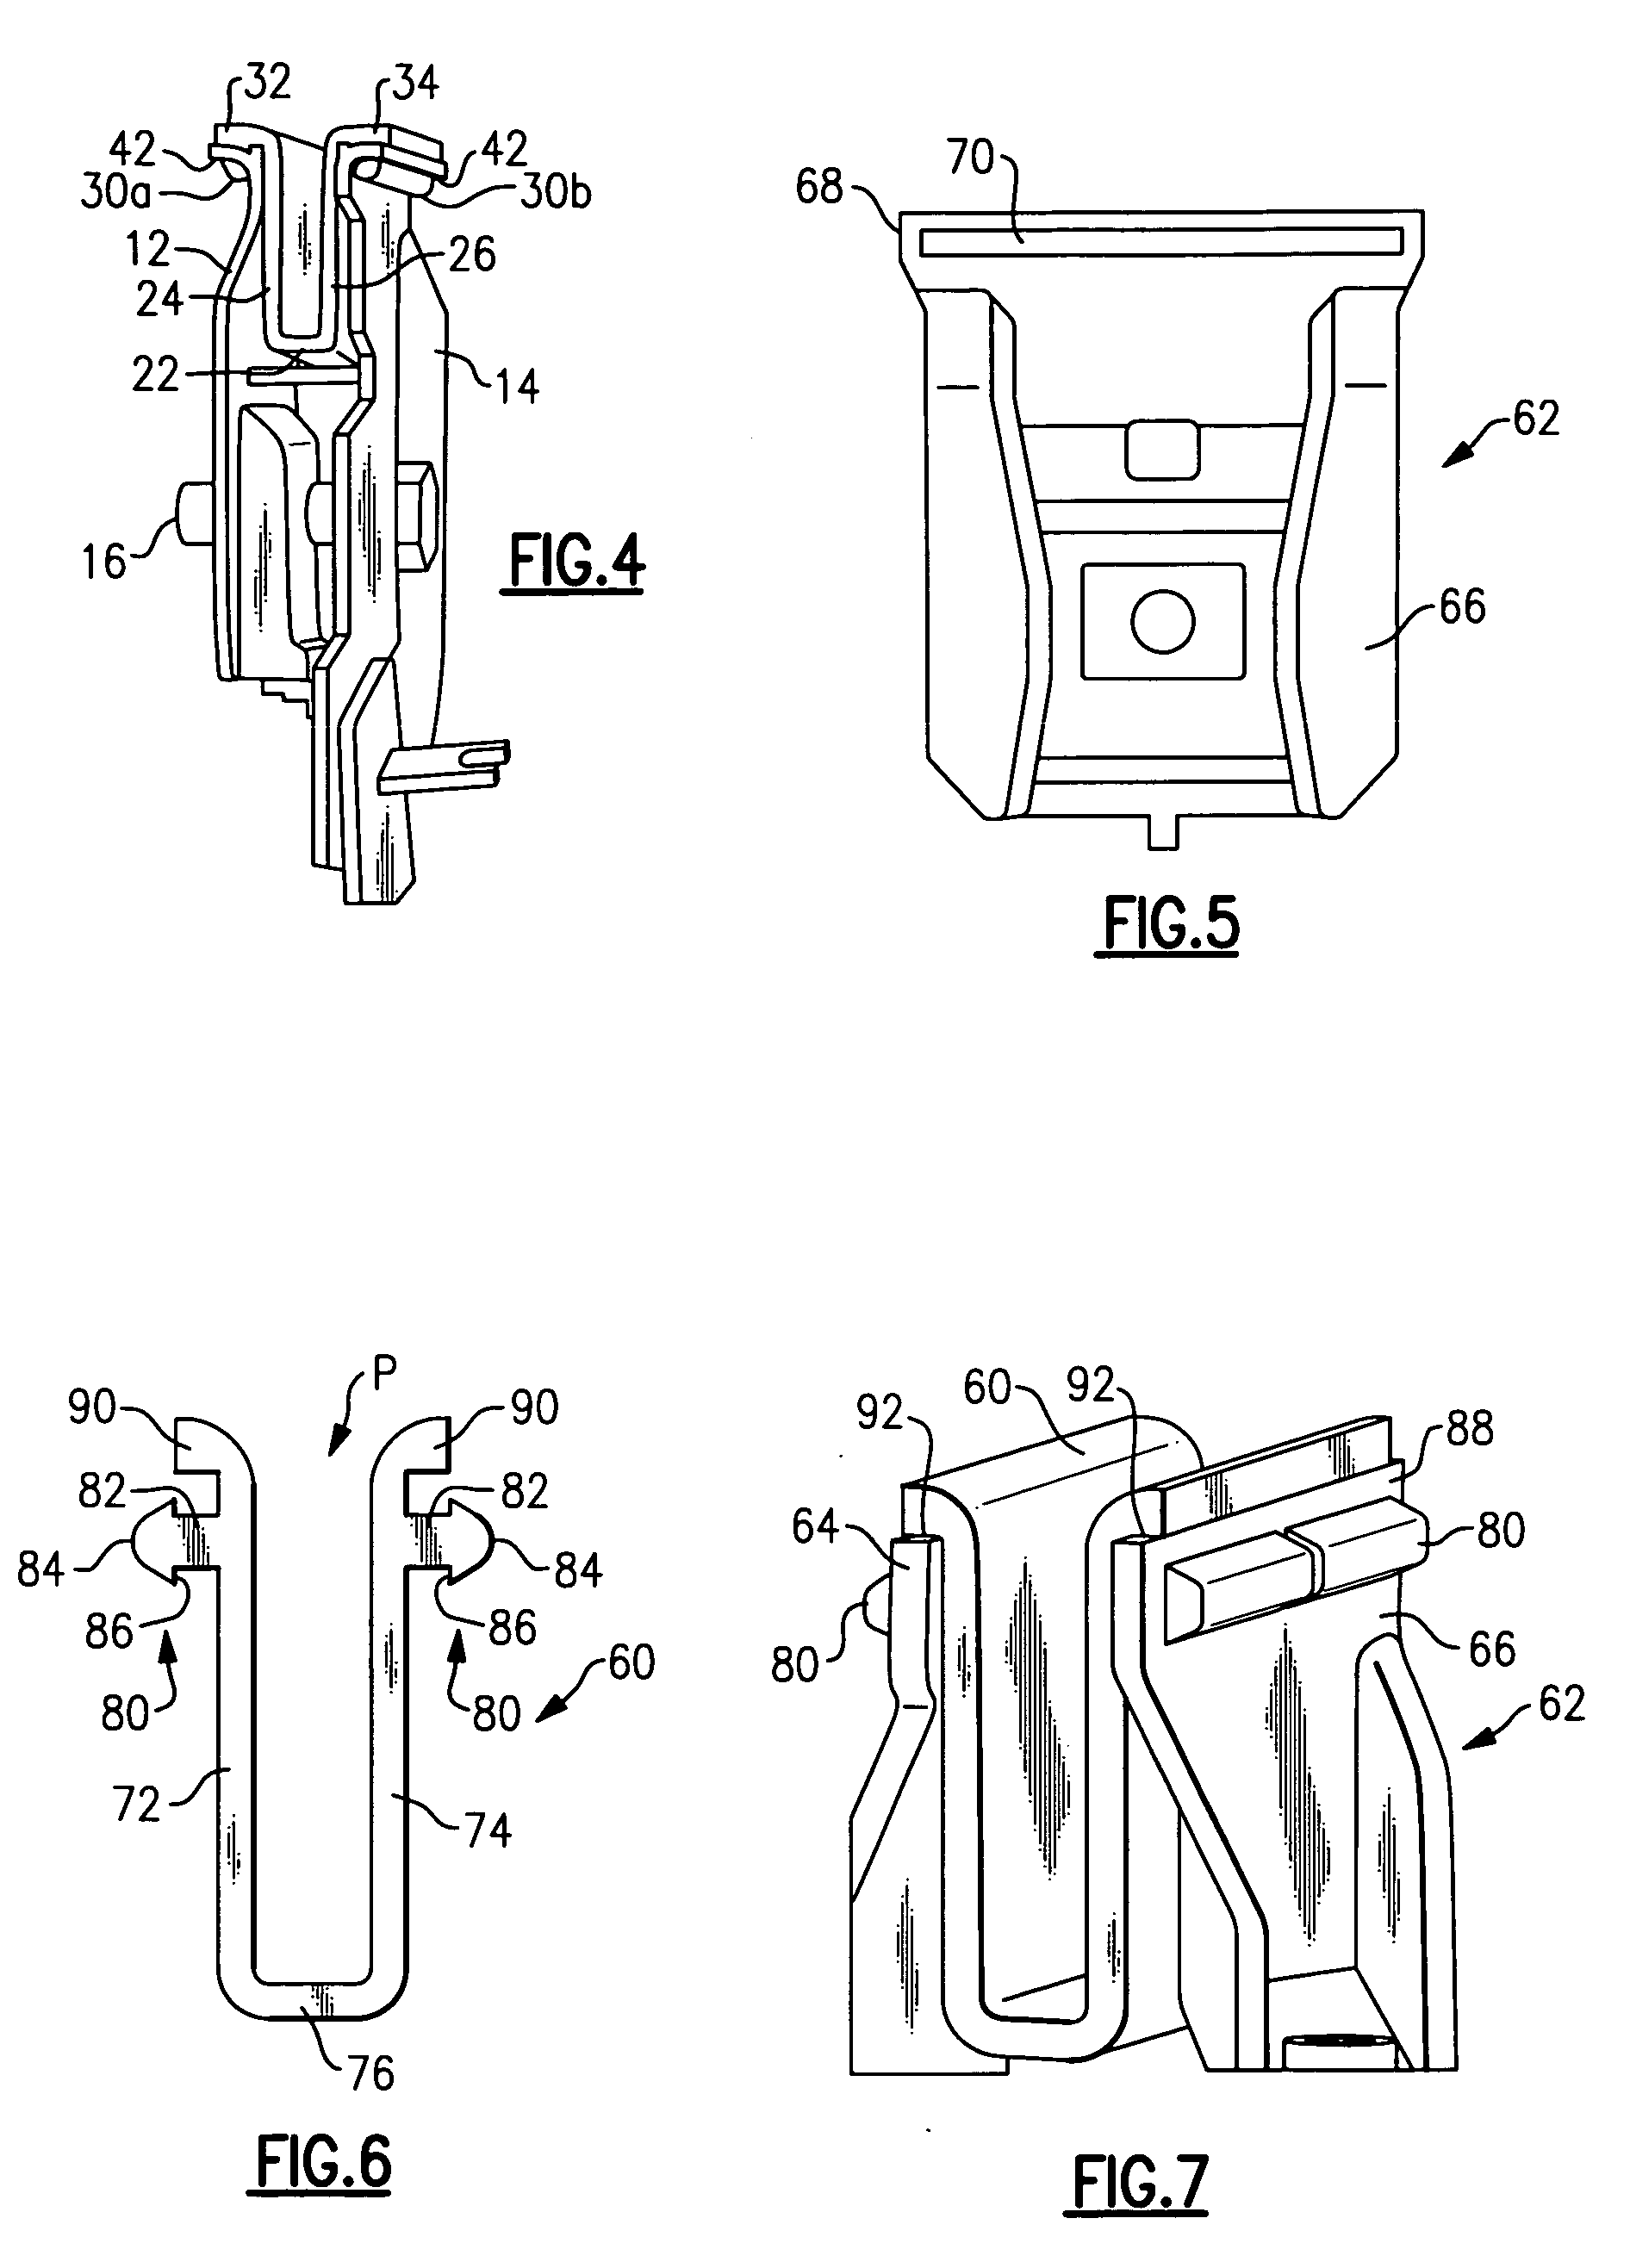 Seal and window clamp assembly